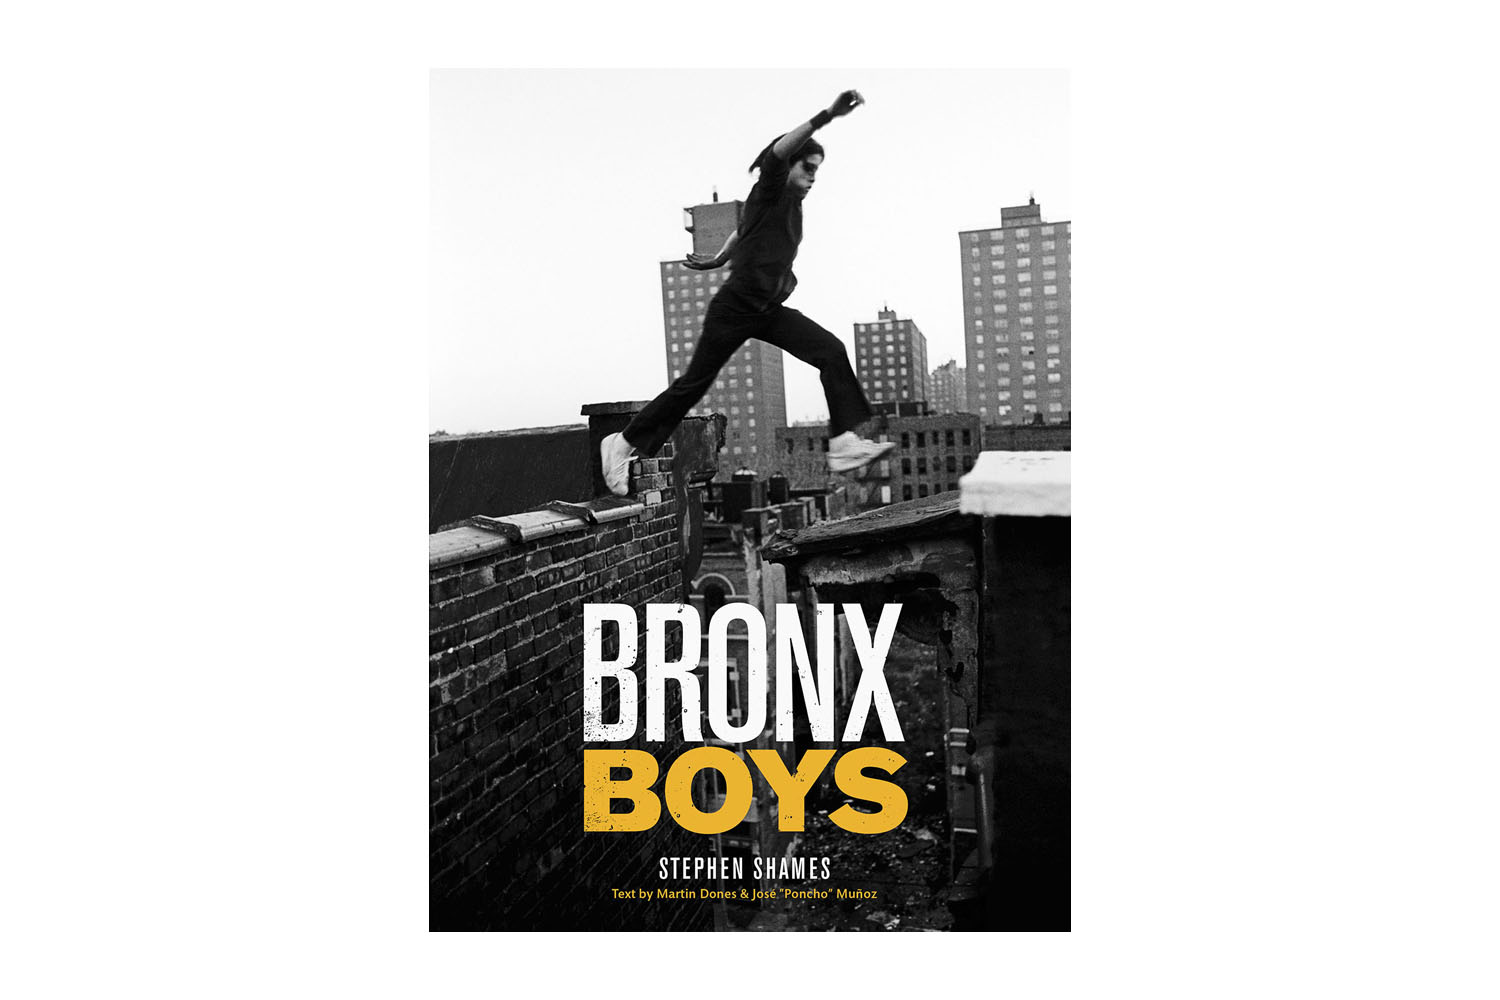 Cover of Bronx Boys. Photographs by Stephen Shames. Published by the University of Texas Press, 2014.